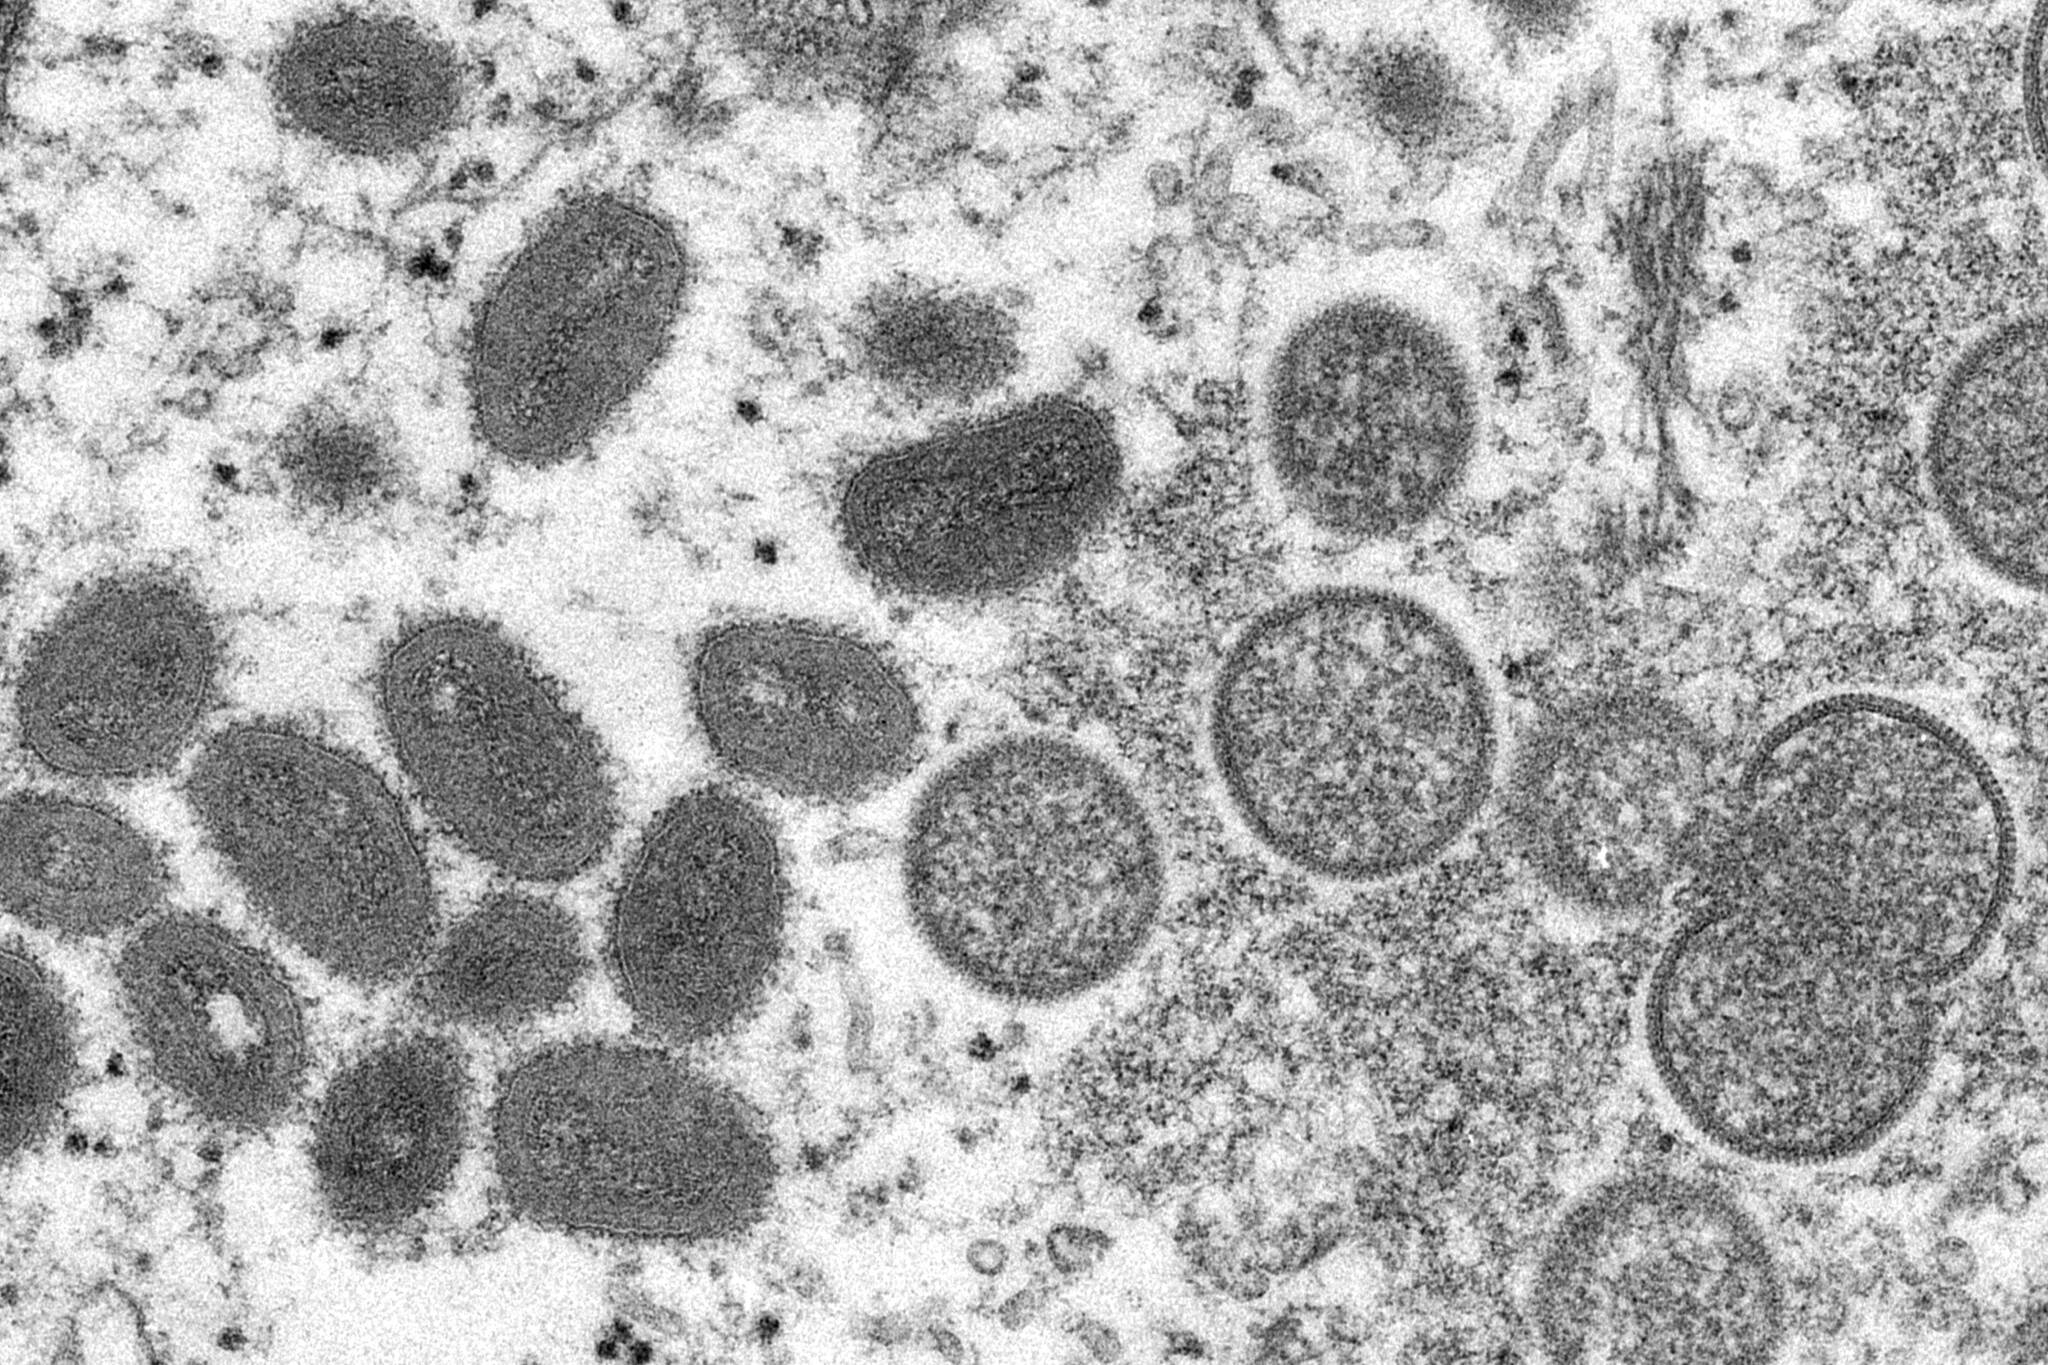 Cynthia S. Goldsmith, Russell Regner / CDC 
This 2003 electron microscope image made available by the Centers for Disease Control and Prevention shows mature, oval-shaped monkeypox virions, left, and spherical immature virions, right, obtained from a sample of human skin associated with the 2003 prairie dog outbreak. Alaska reported on Friday its first case of monkeypox.